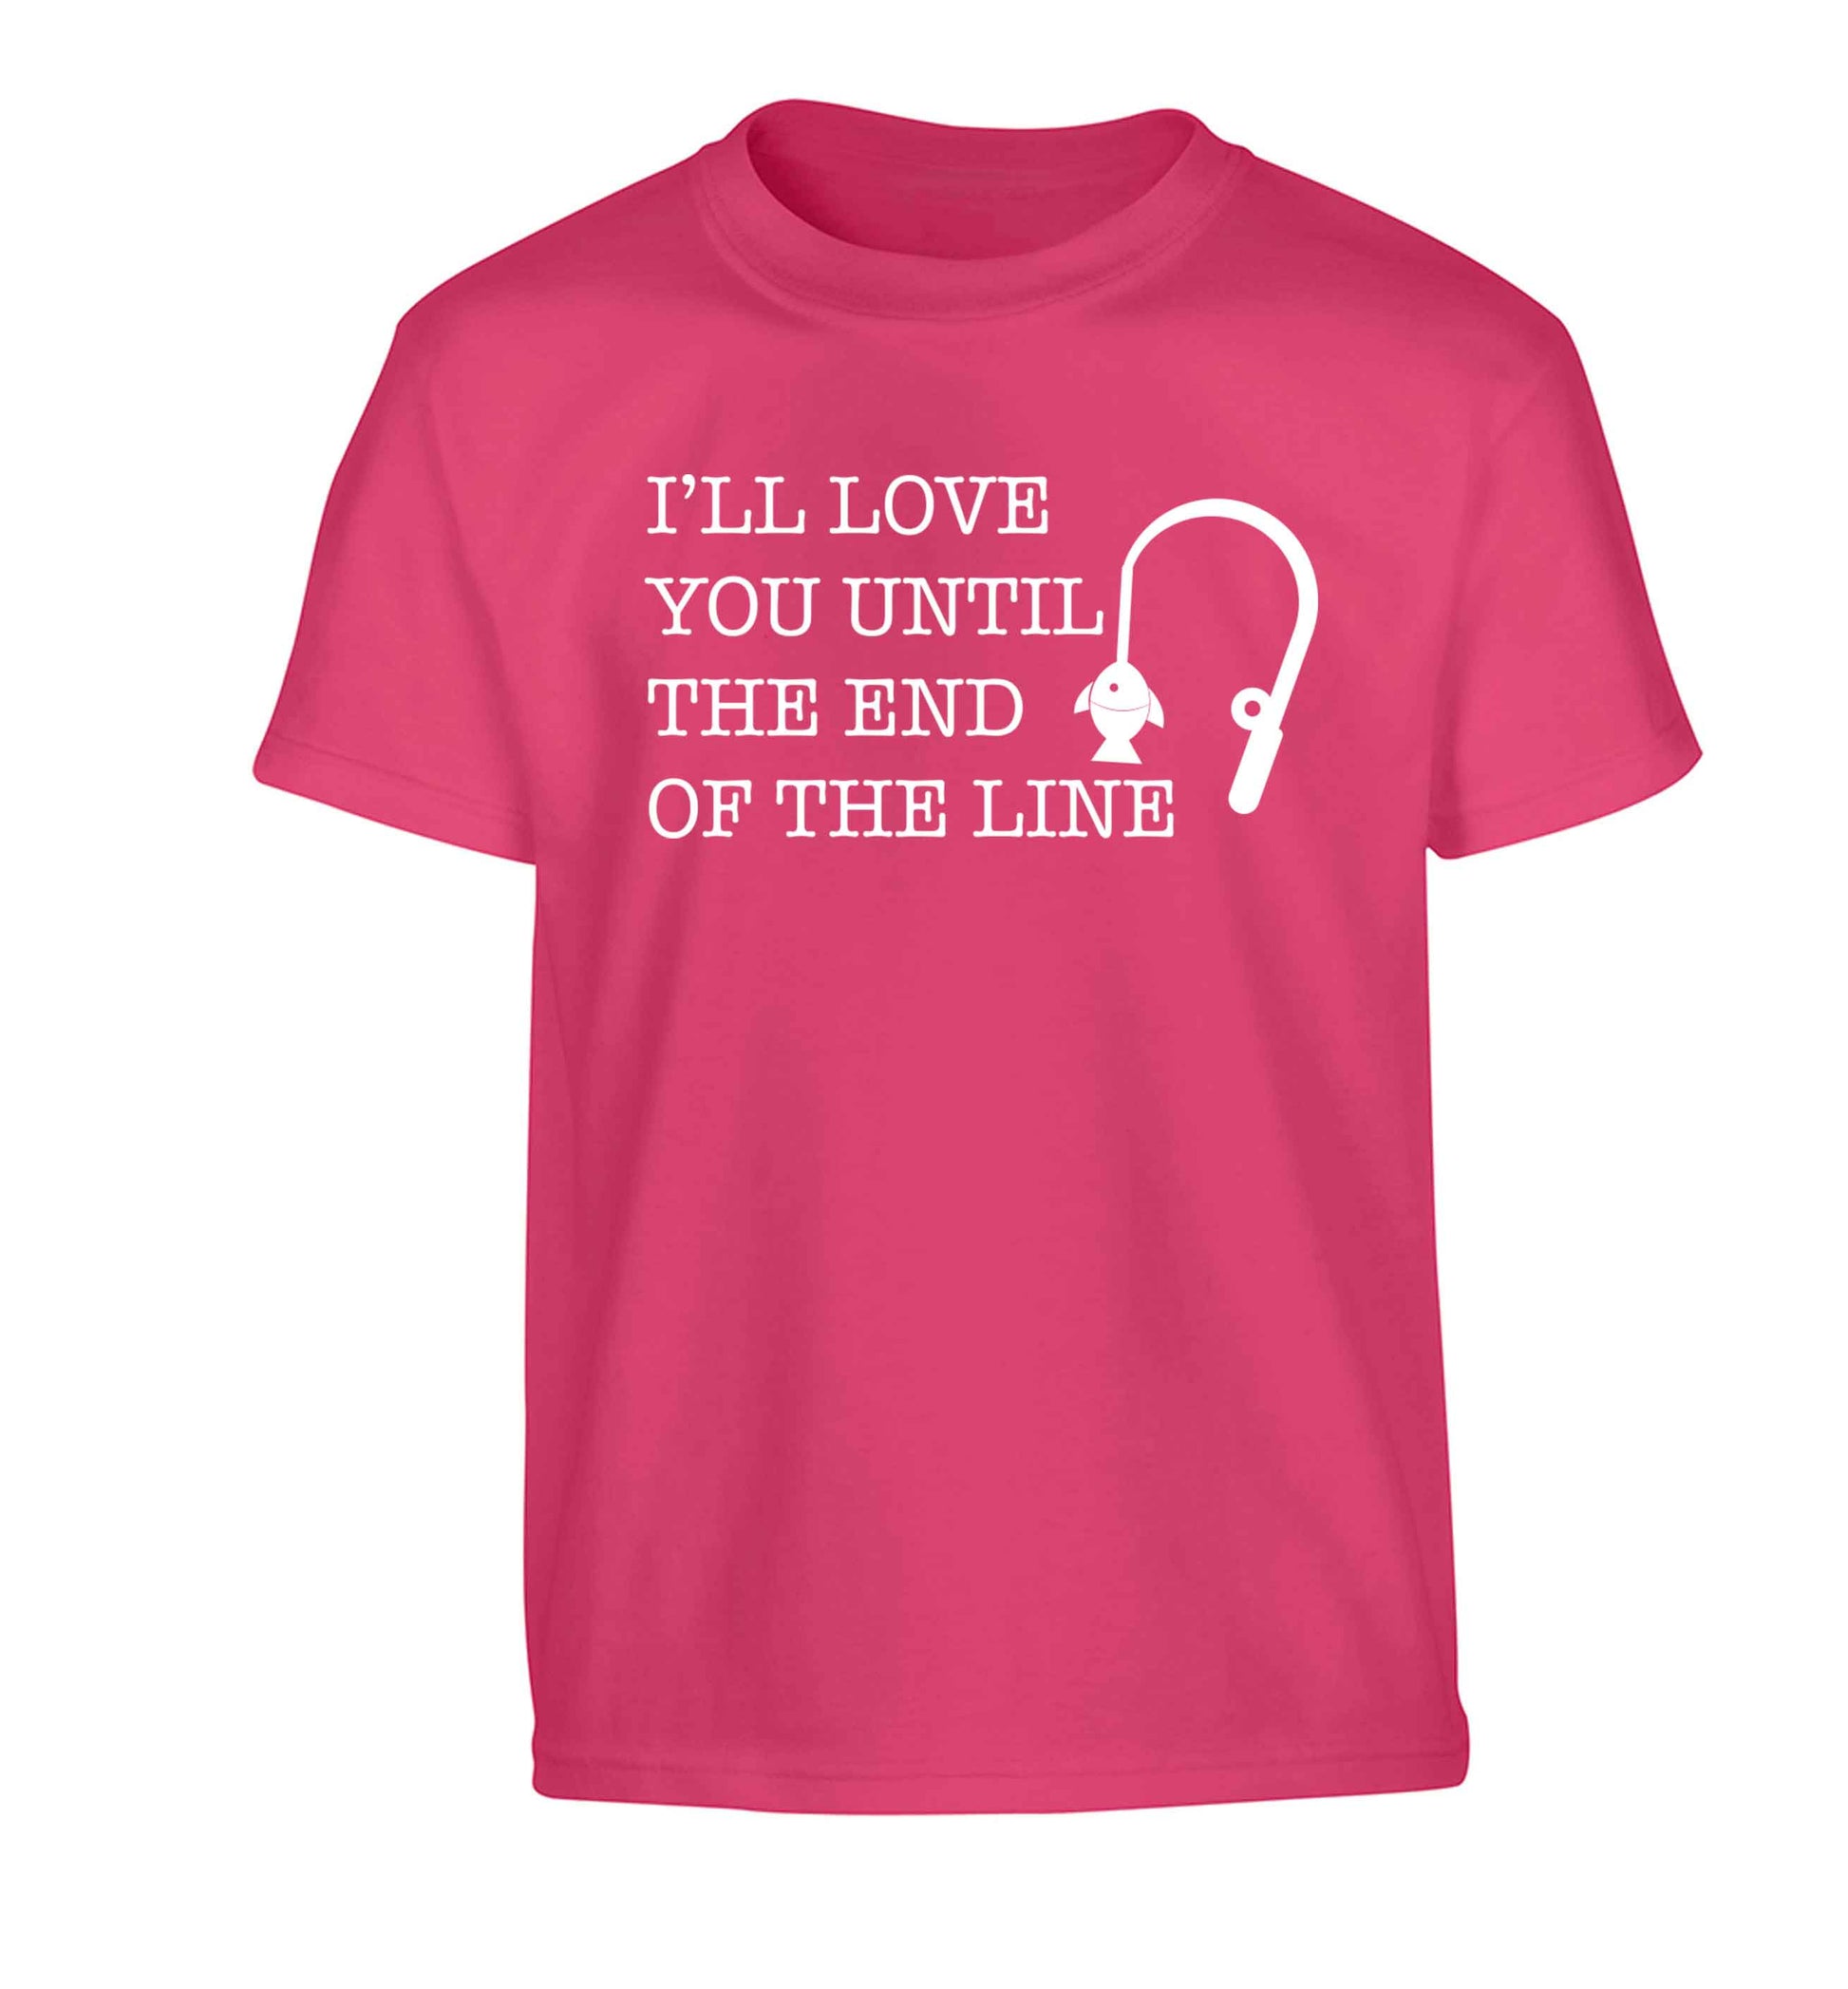 I'll love you until the end of the line Children's pink Tshirt 12-13 Years